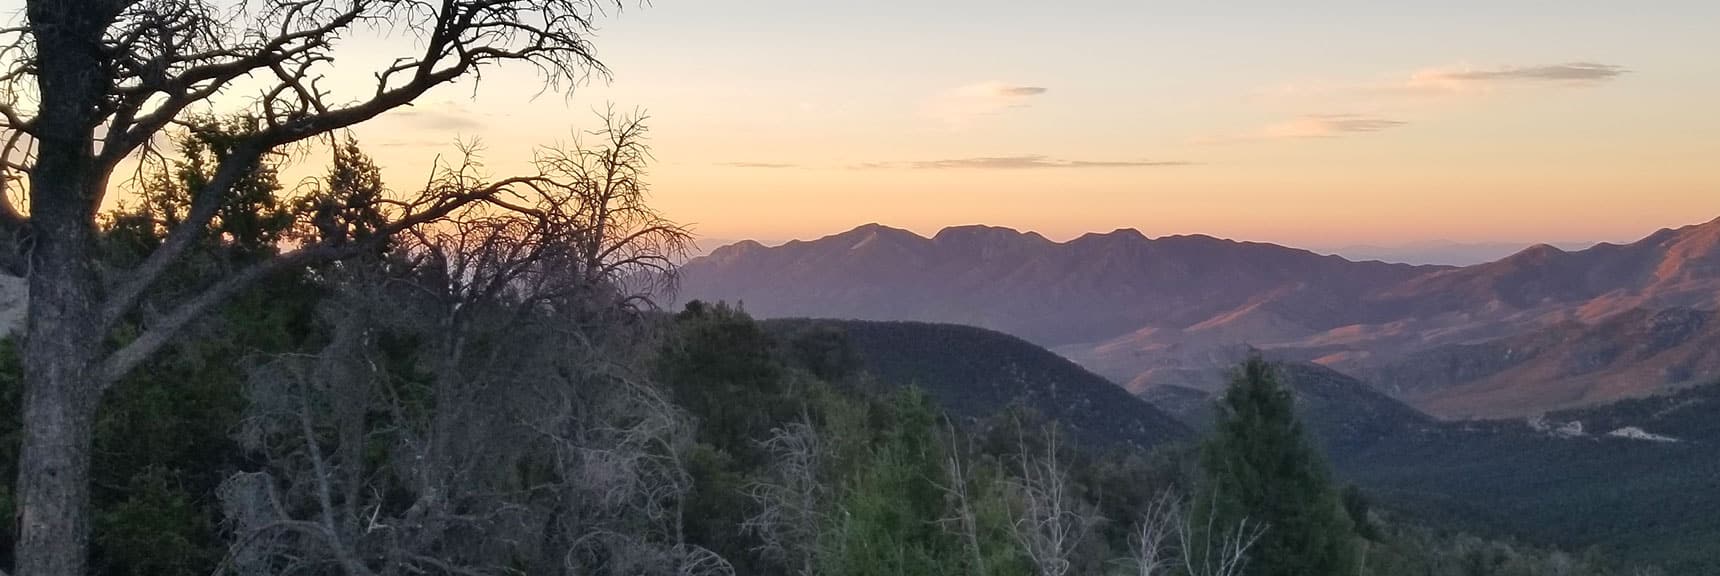 Sunrise View from North Loop Trailhead Back Toward La Madre Mountain